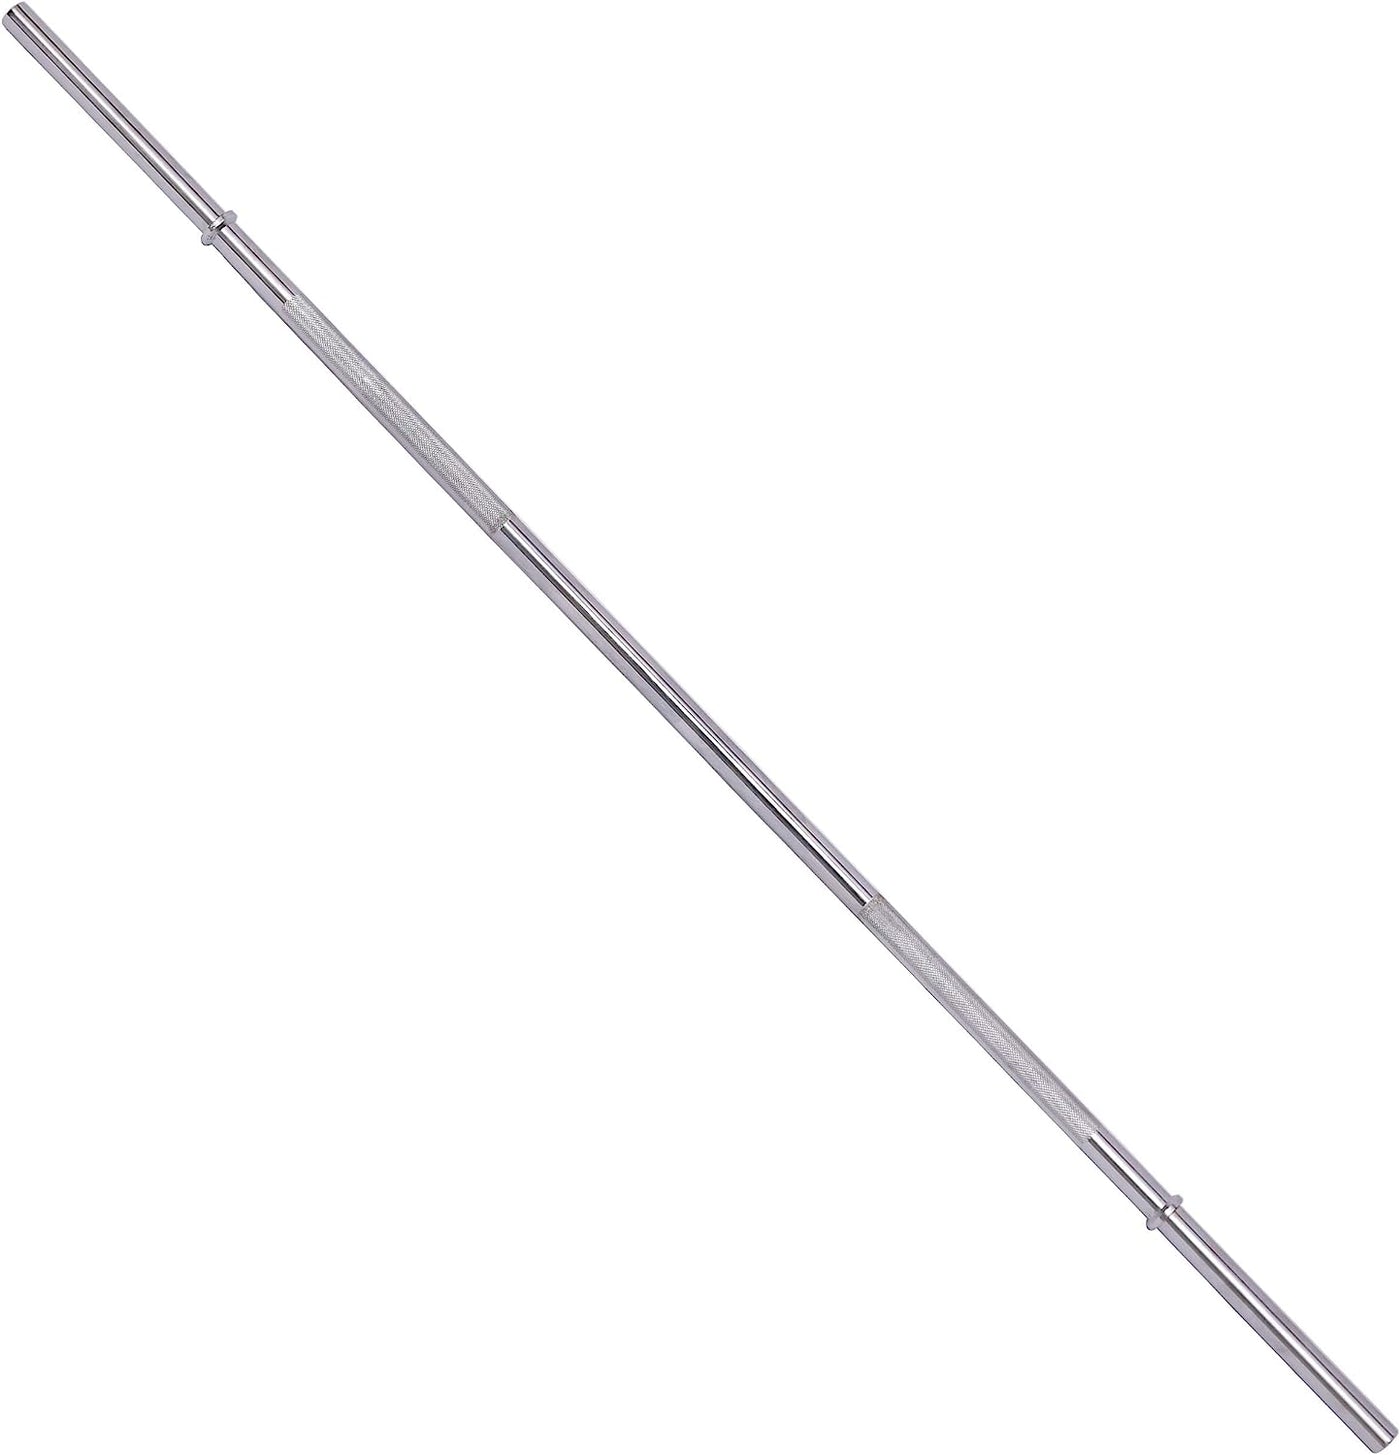 Sporzon! Olympic Barbell Standard Weightlifting Barbell, 1-inch, 5FT, Chrome - $30